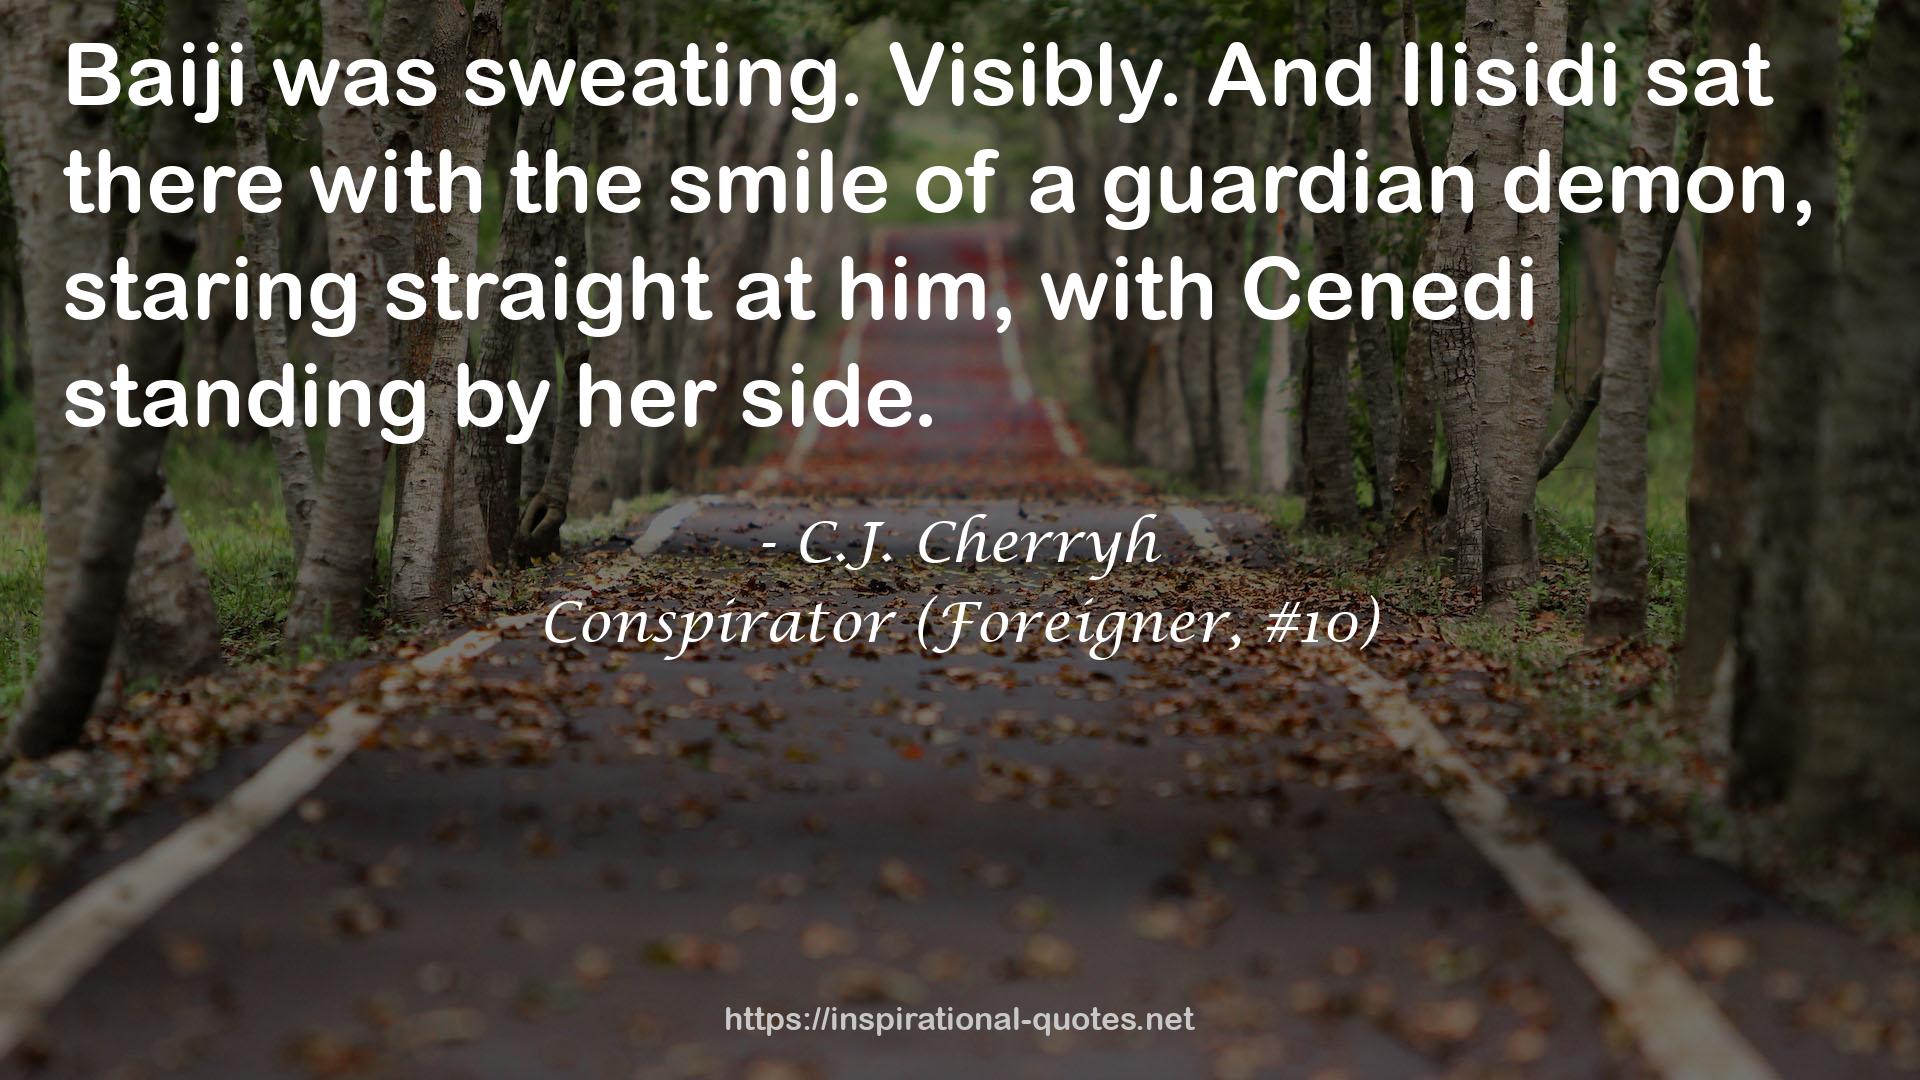 Conspirator (Foreigner, #10) QUOTES